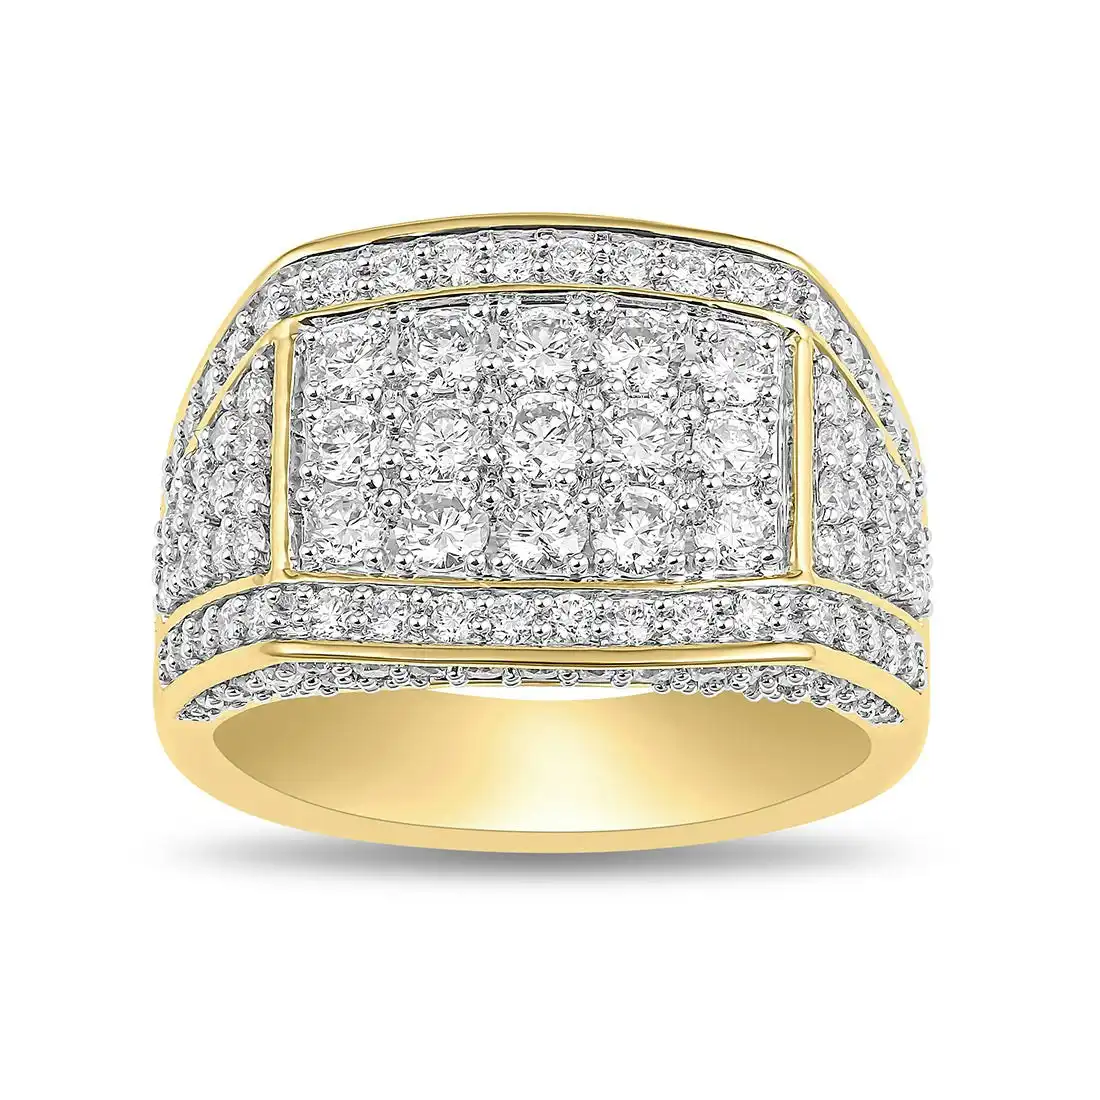 Meera Men's Ring with 3.00ct of Laboratory Grown Diamonds in 9ct Yellow Gold